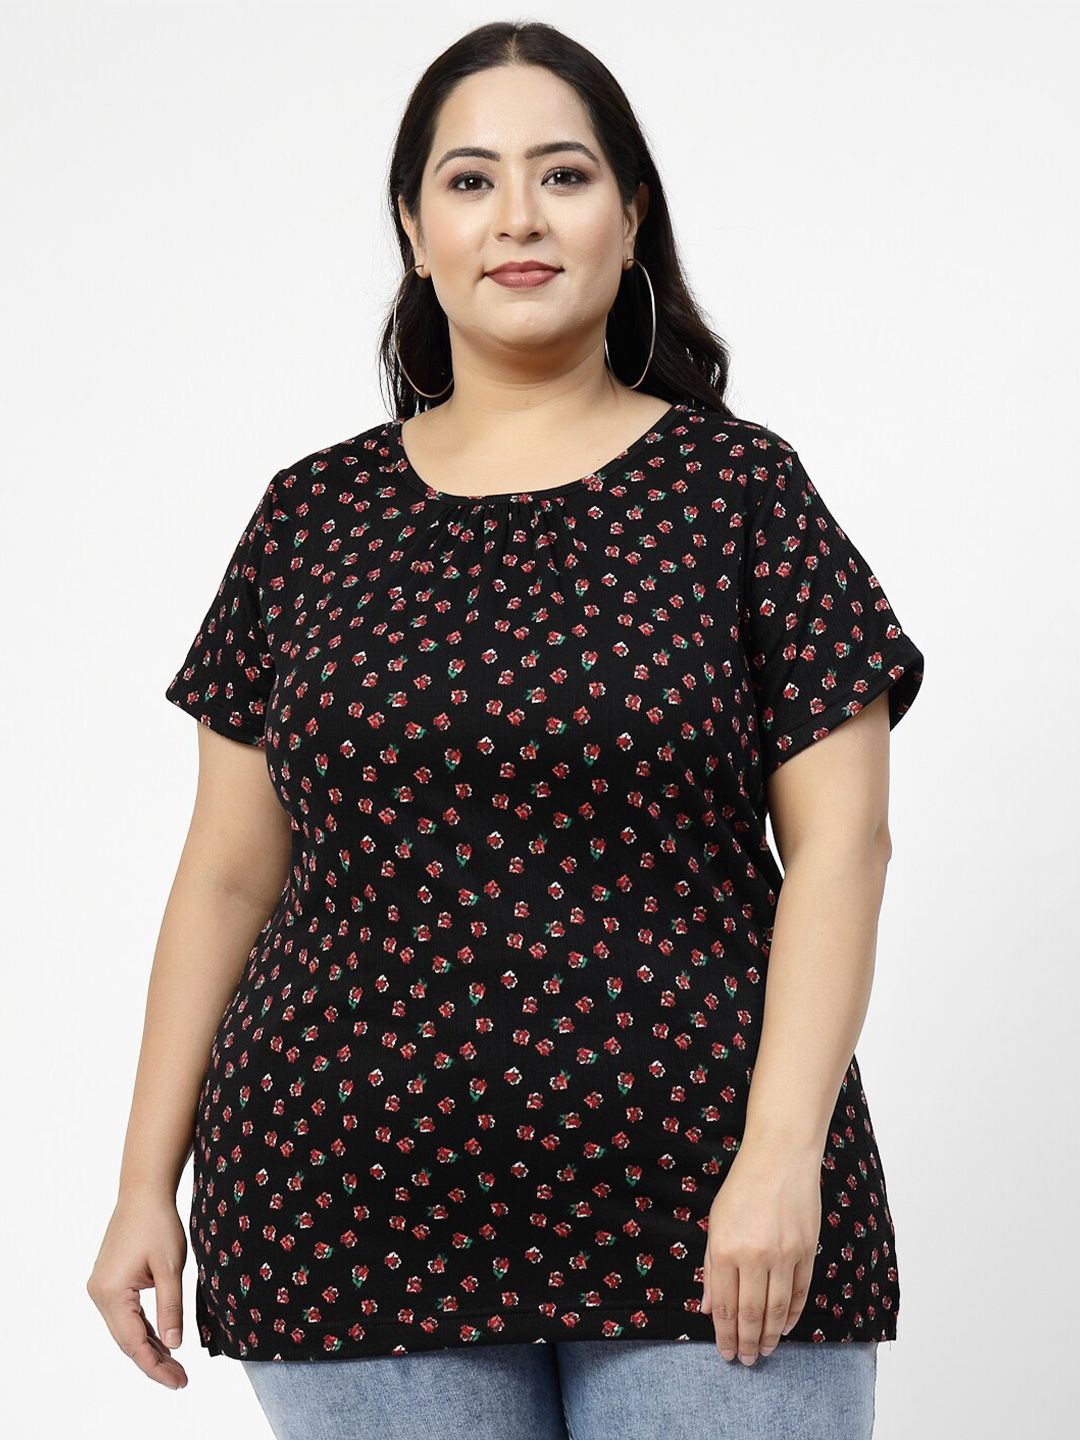 plusS Plus Size Black Floral Printed Cotton T-shirt Price in India